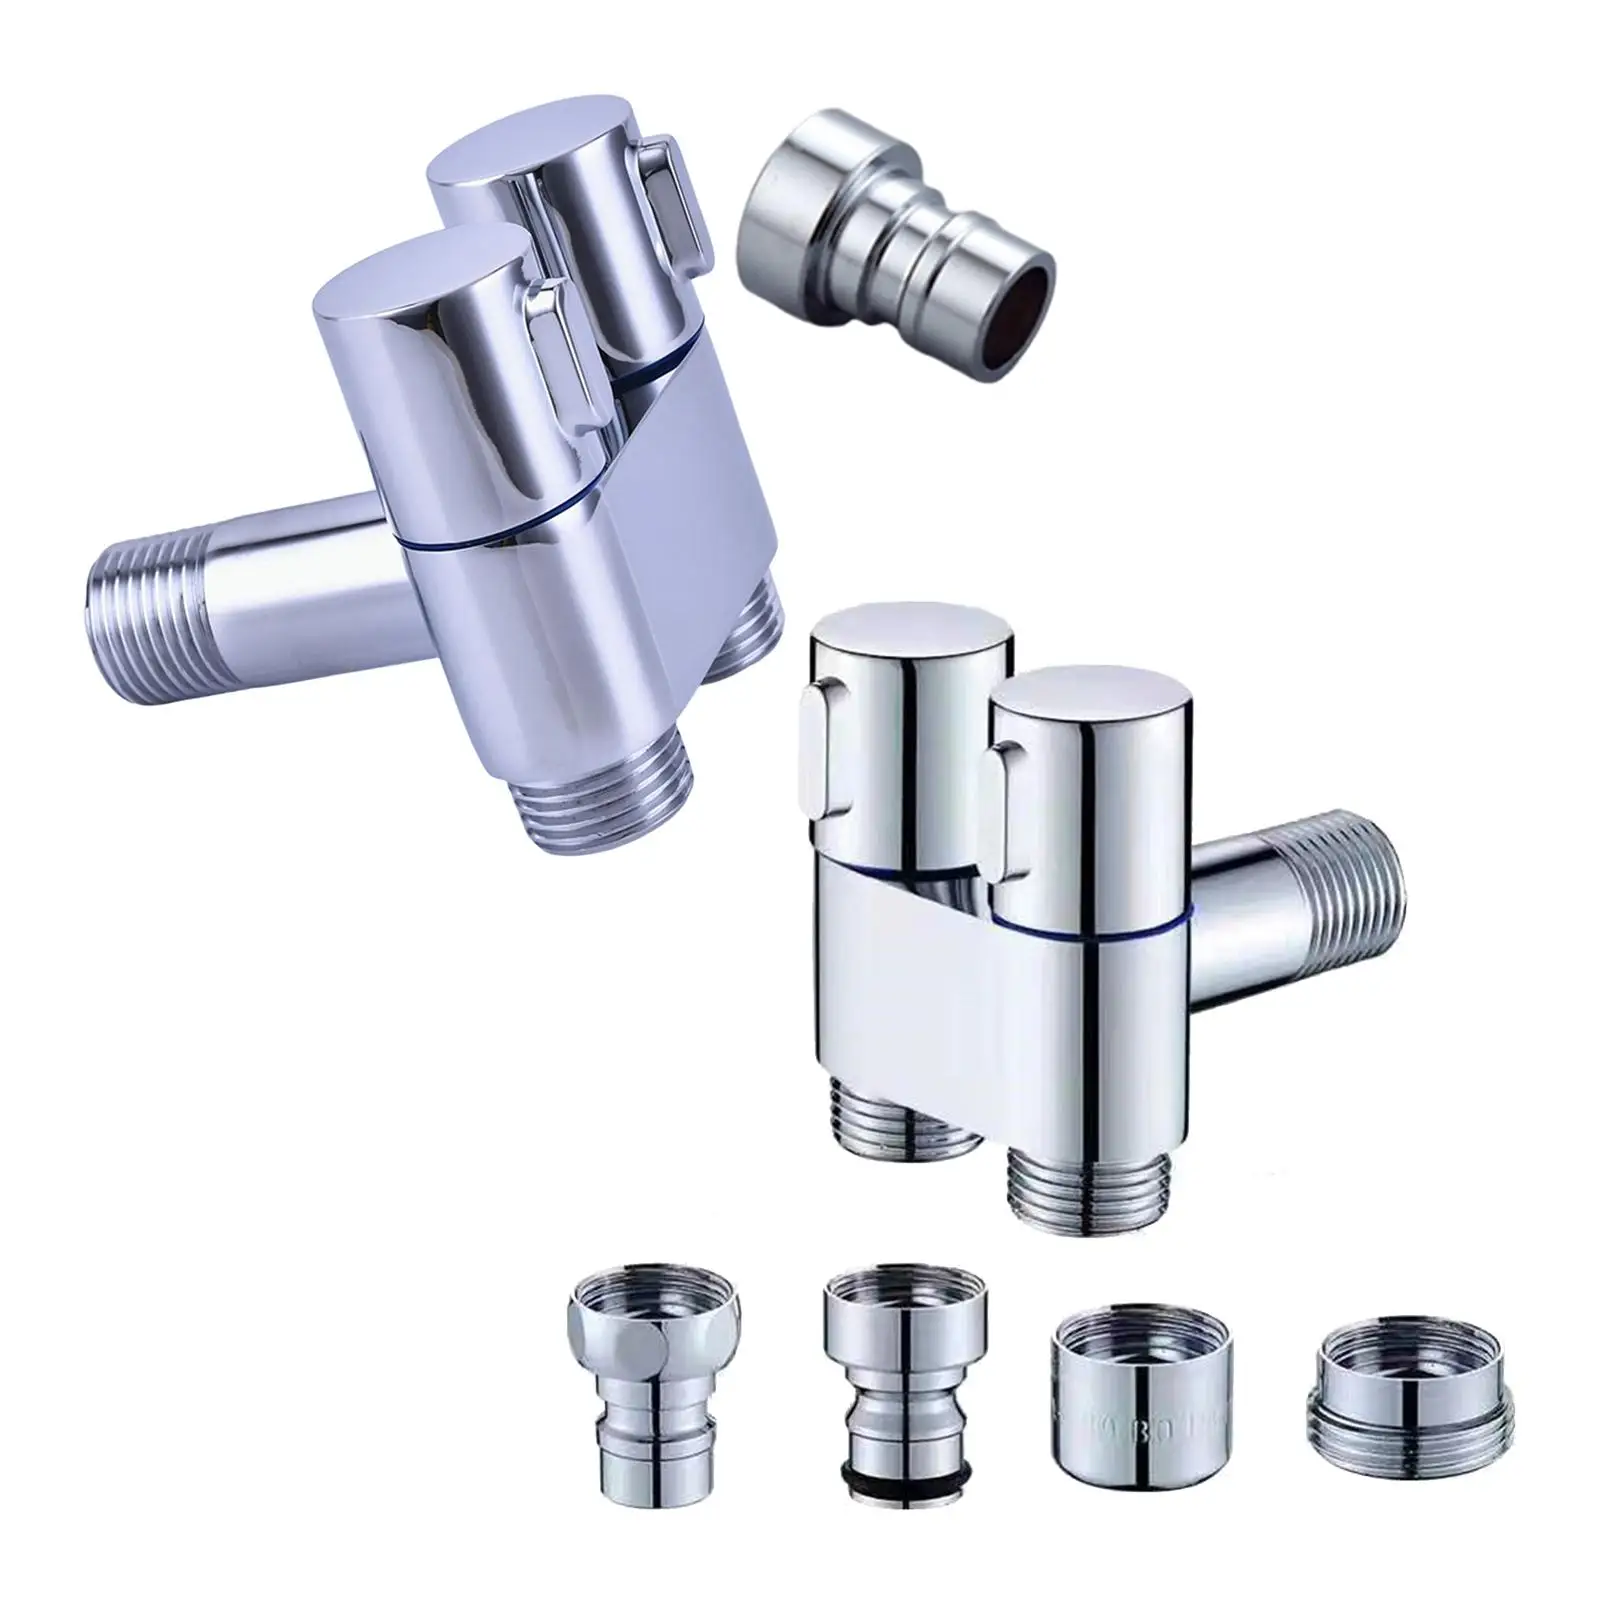 3 Through Angle Stop Valve Faucet Valve Water Flow G1/2 Thread Filling Valve for Home Cold ,Hot Water Basin Toilet Kitchen